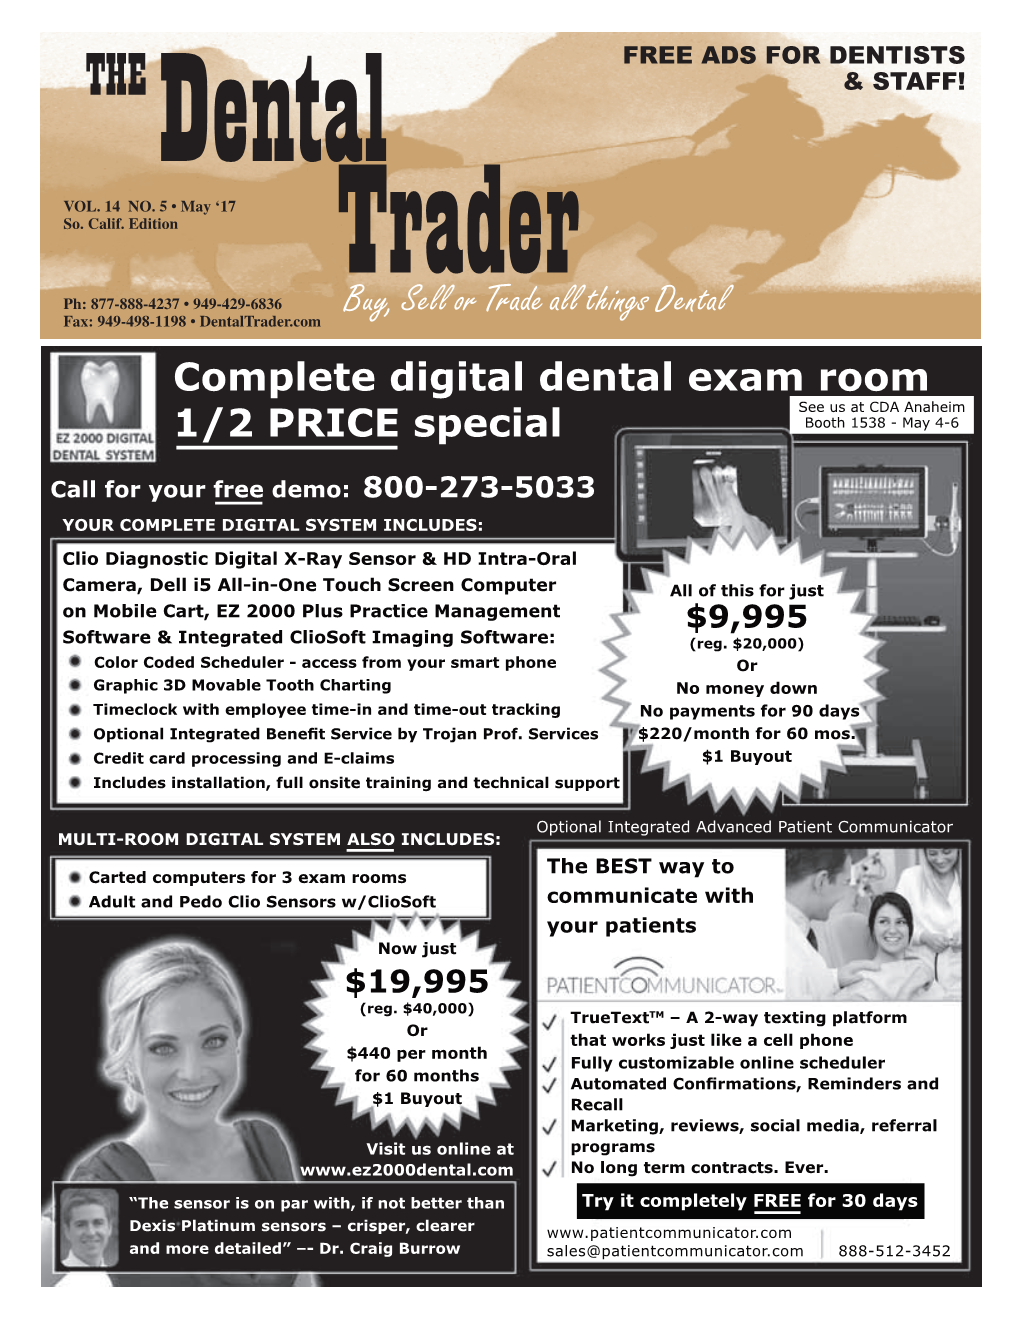 Buy, Sell Or Trade All Things Dental Complete Digital Dental Exam Room See Us at CDA Anaheim 1/2 PRICE Special Booth 1538 - May 4-6